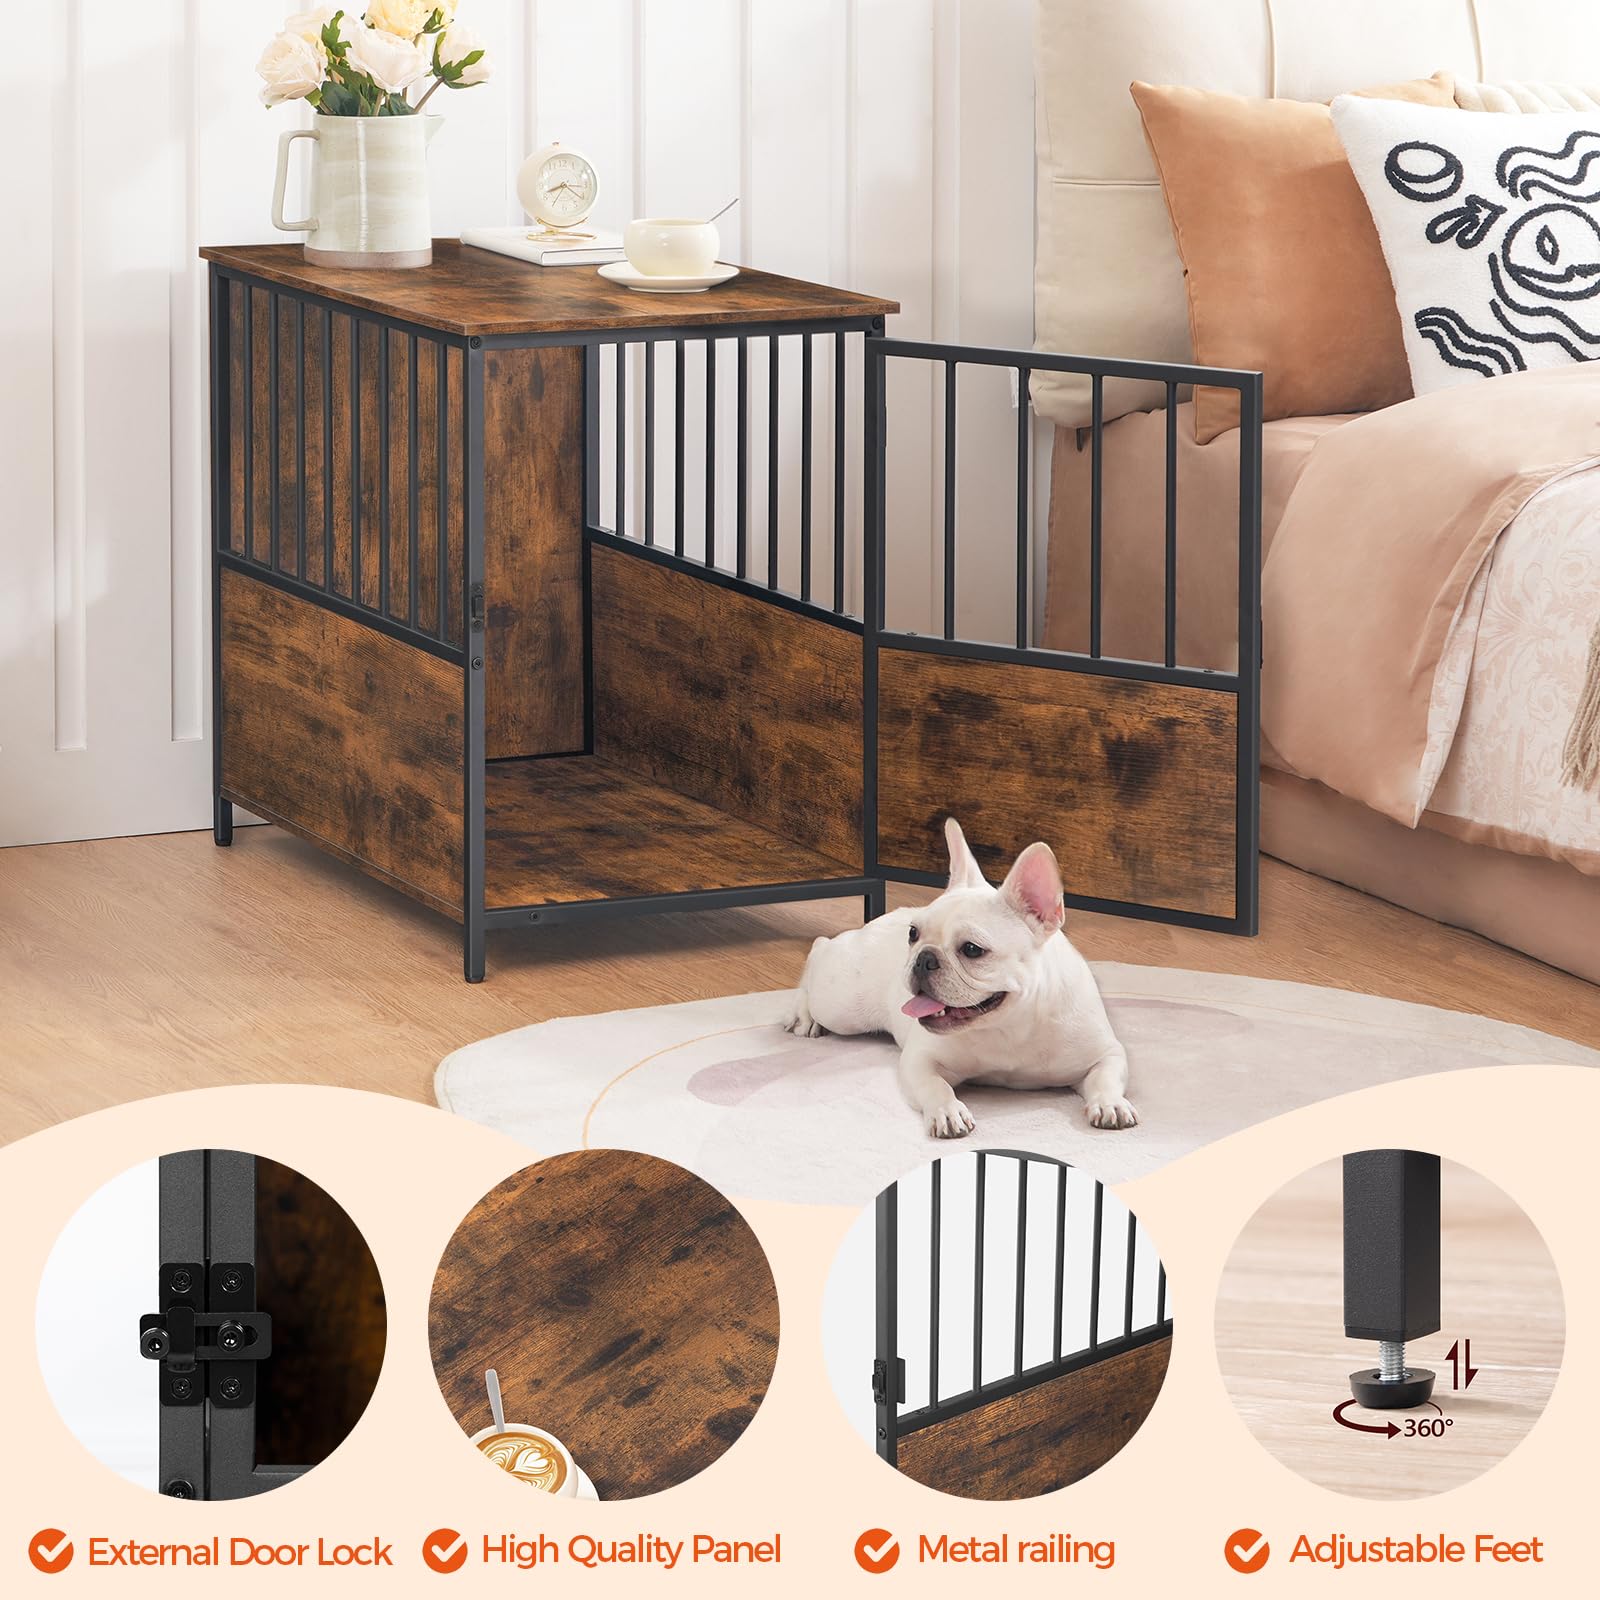 MAHANCRIS Dog Crate Furniture, Wooden Dog Kennel for Small Medium Dogs, Heavy Duty Dog Cage with Lockable Door, Decorative Indoor Dog House End Table, Chew-Resistant, Rustic Brown DCHR6601